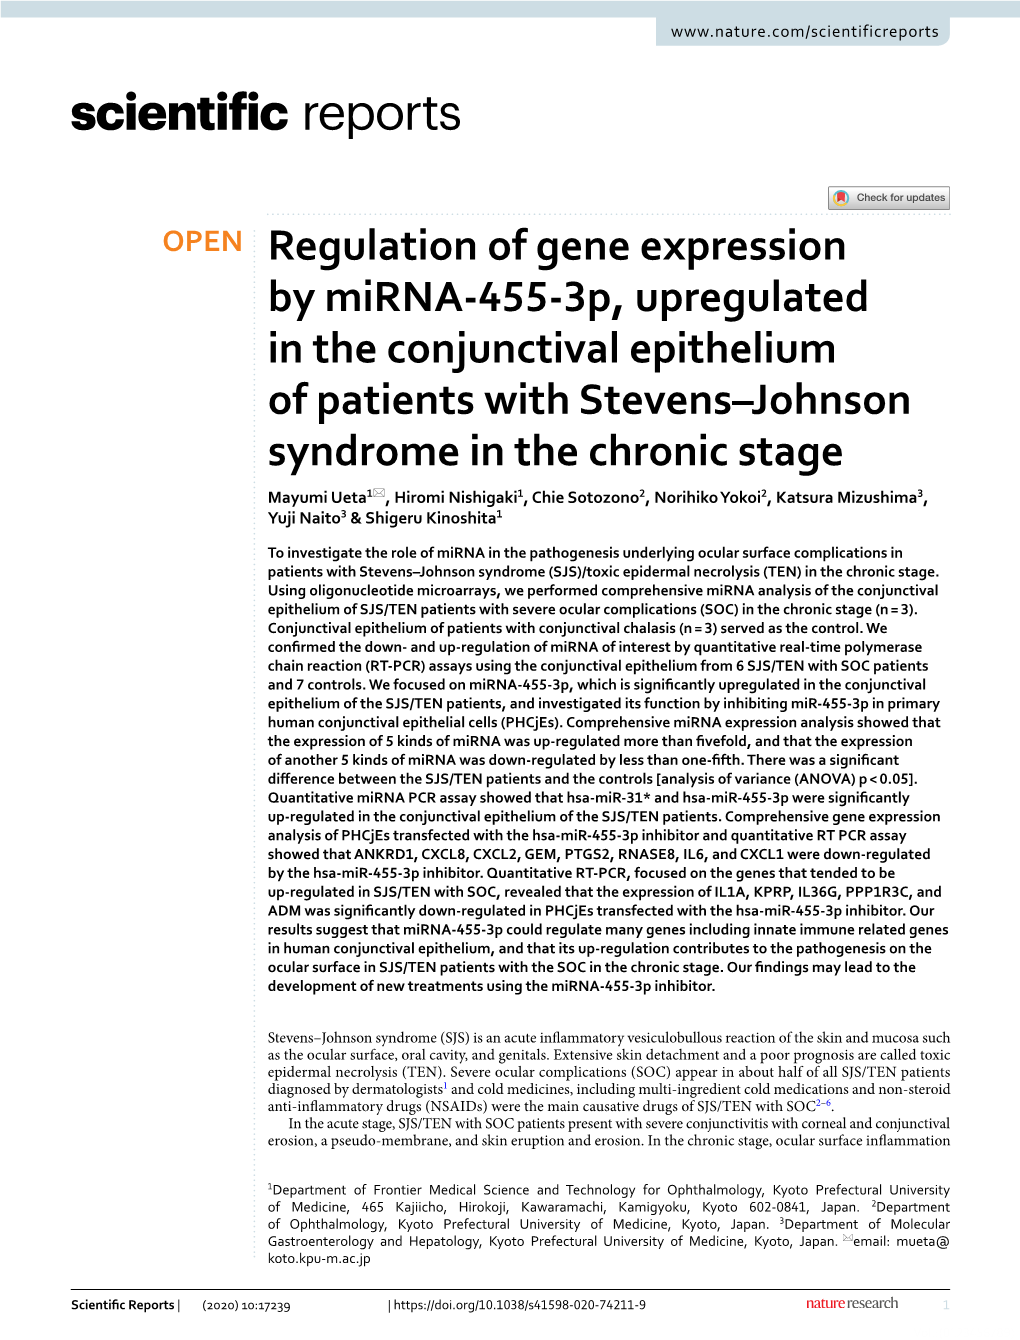 Regulation of Gene Expression by Mirna-455-3P, Upregulated in The